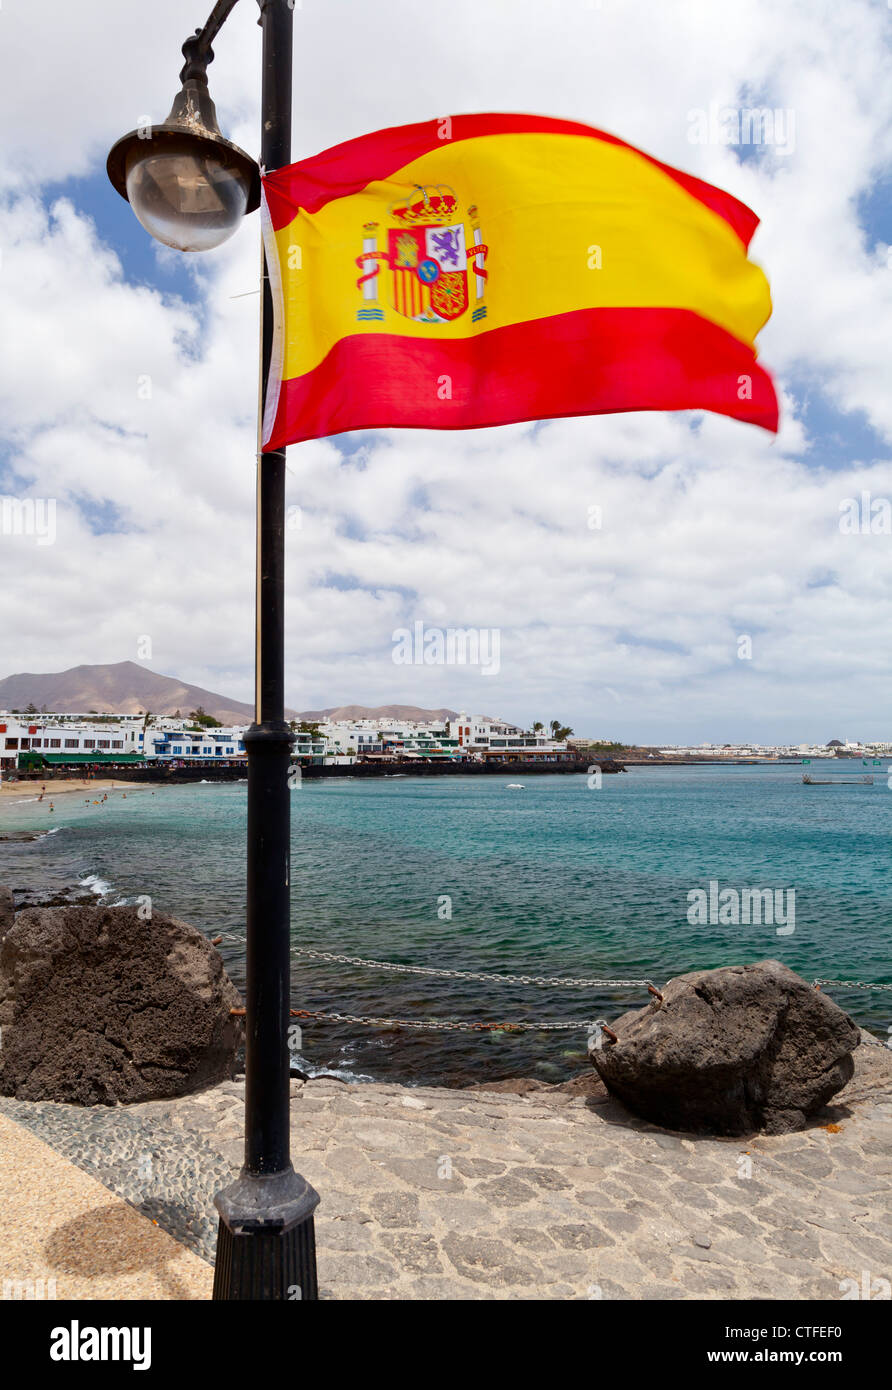 Shops at the water front - Playa Blanca, Lanzarote, Canary Islands, Spain, Europe Stock Photo